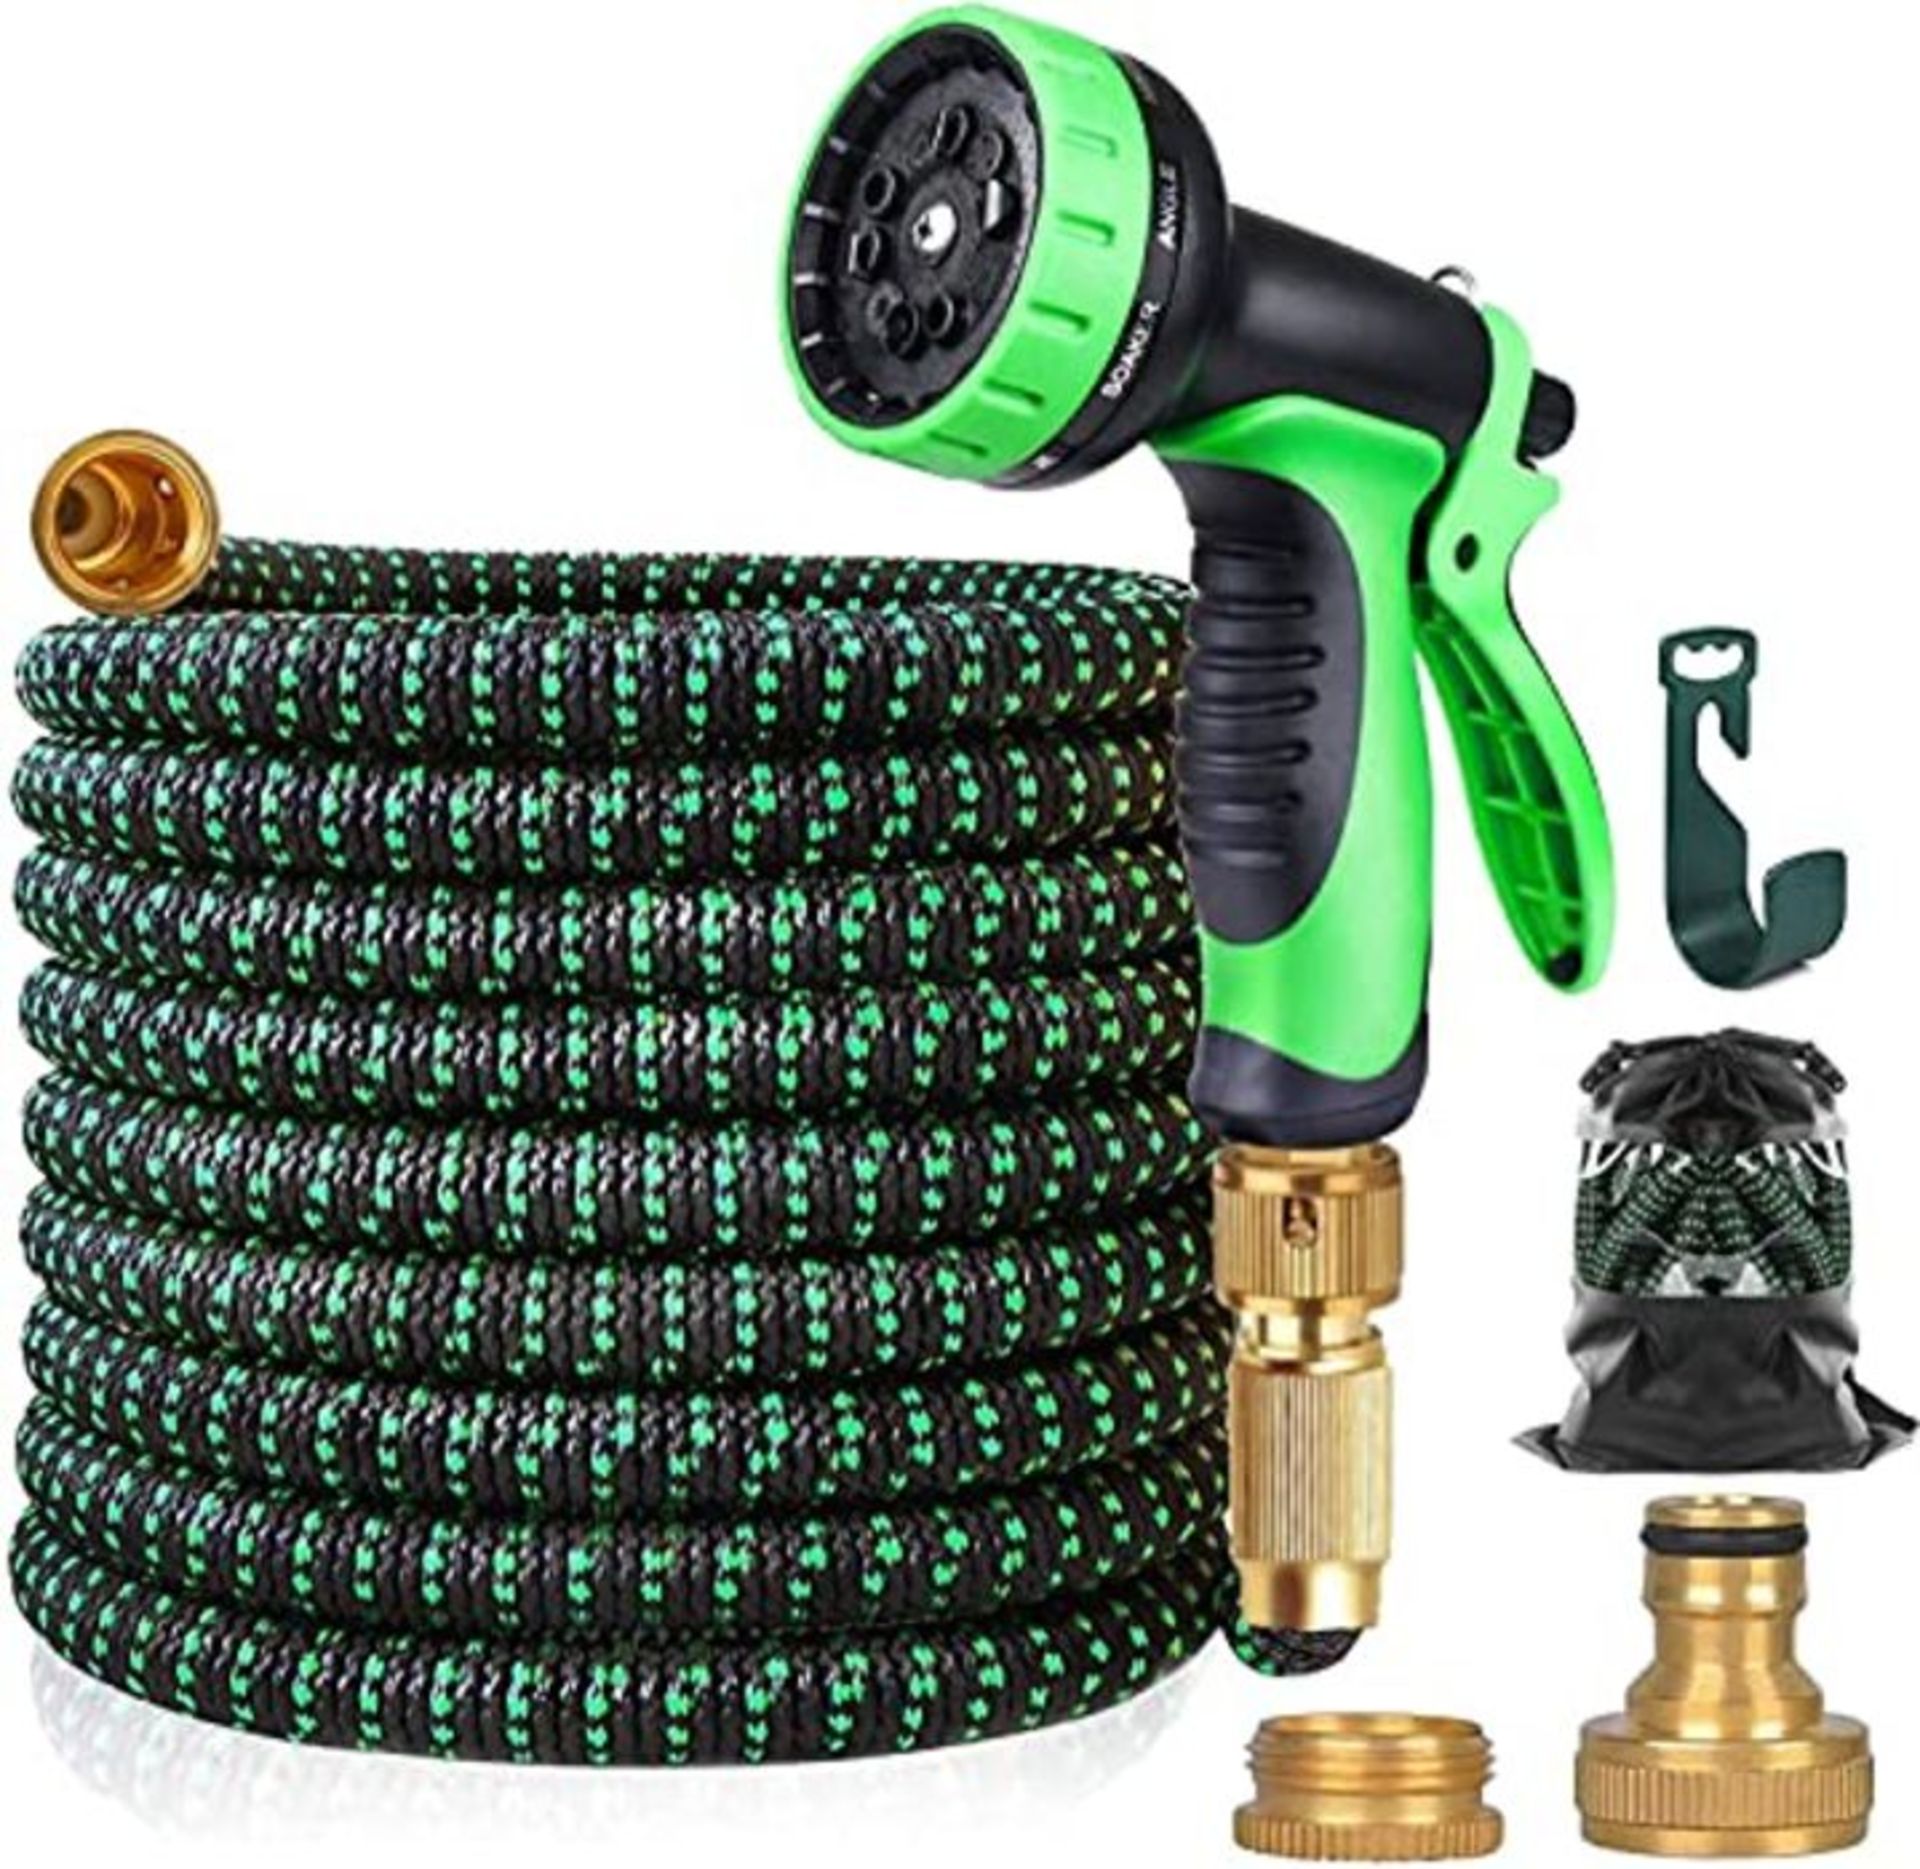 100ft Expandable Garden Hose with 10 Function Spray Nozzle, Lightweight Hose Pipe with